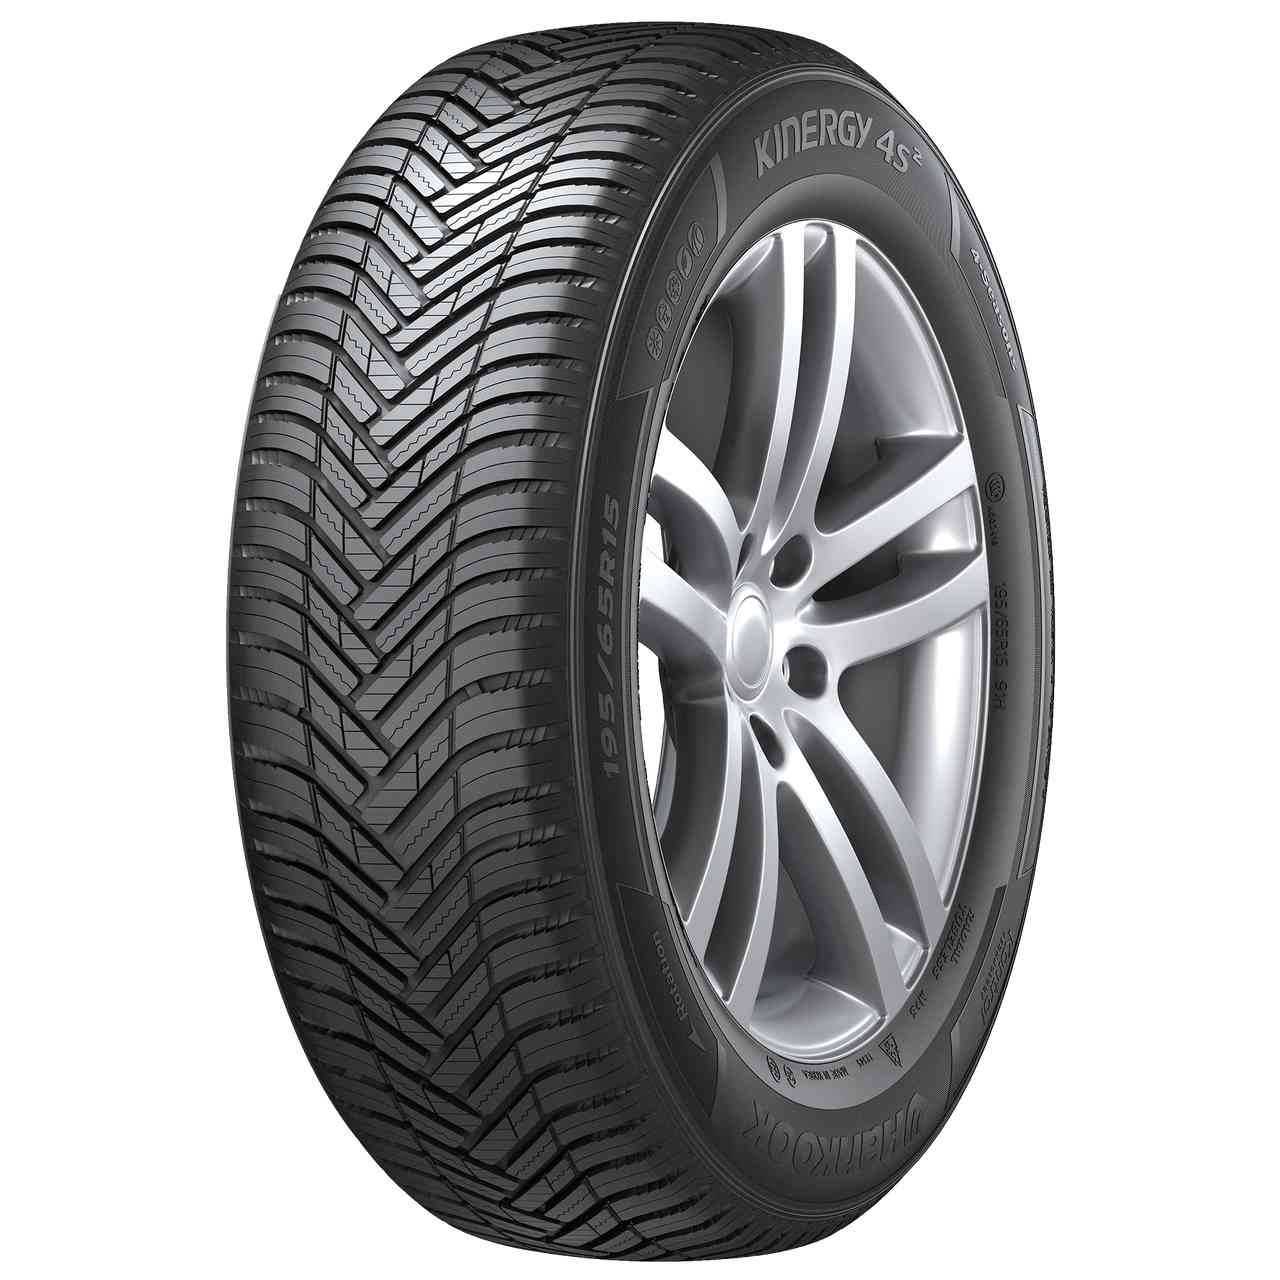 HANKOOK KINERGY 4S 2 (H750) 225/60R18 104W BSW